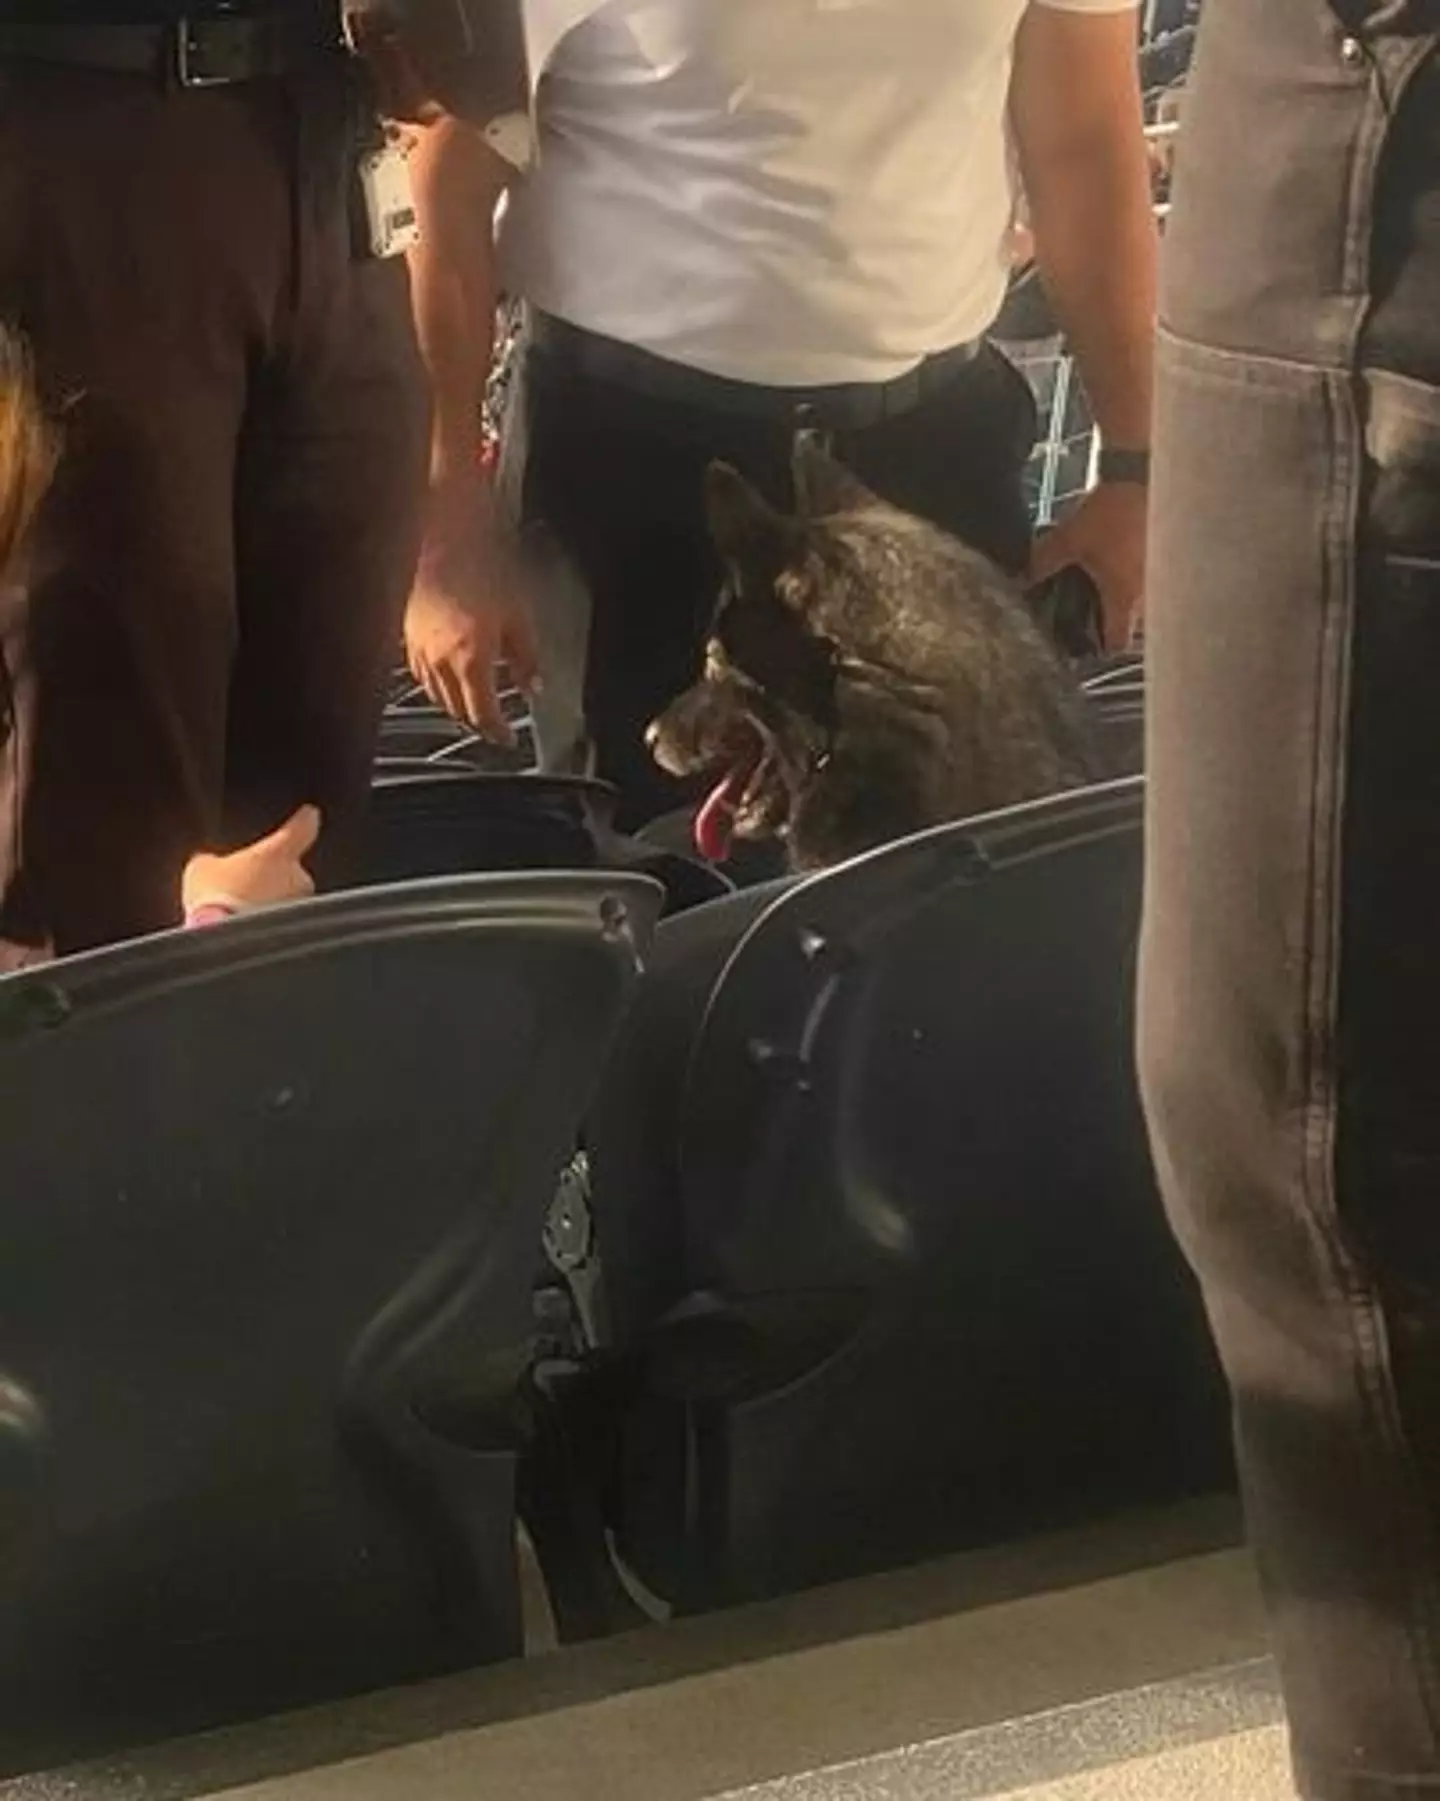 Storm was spotted at Metallica concert at the SoFi stadium in LA.